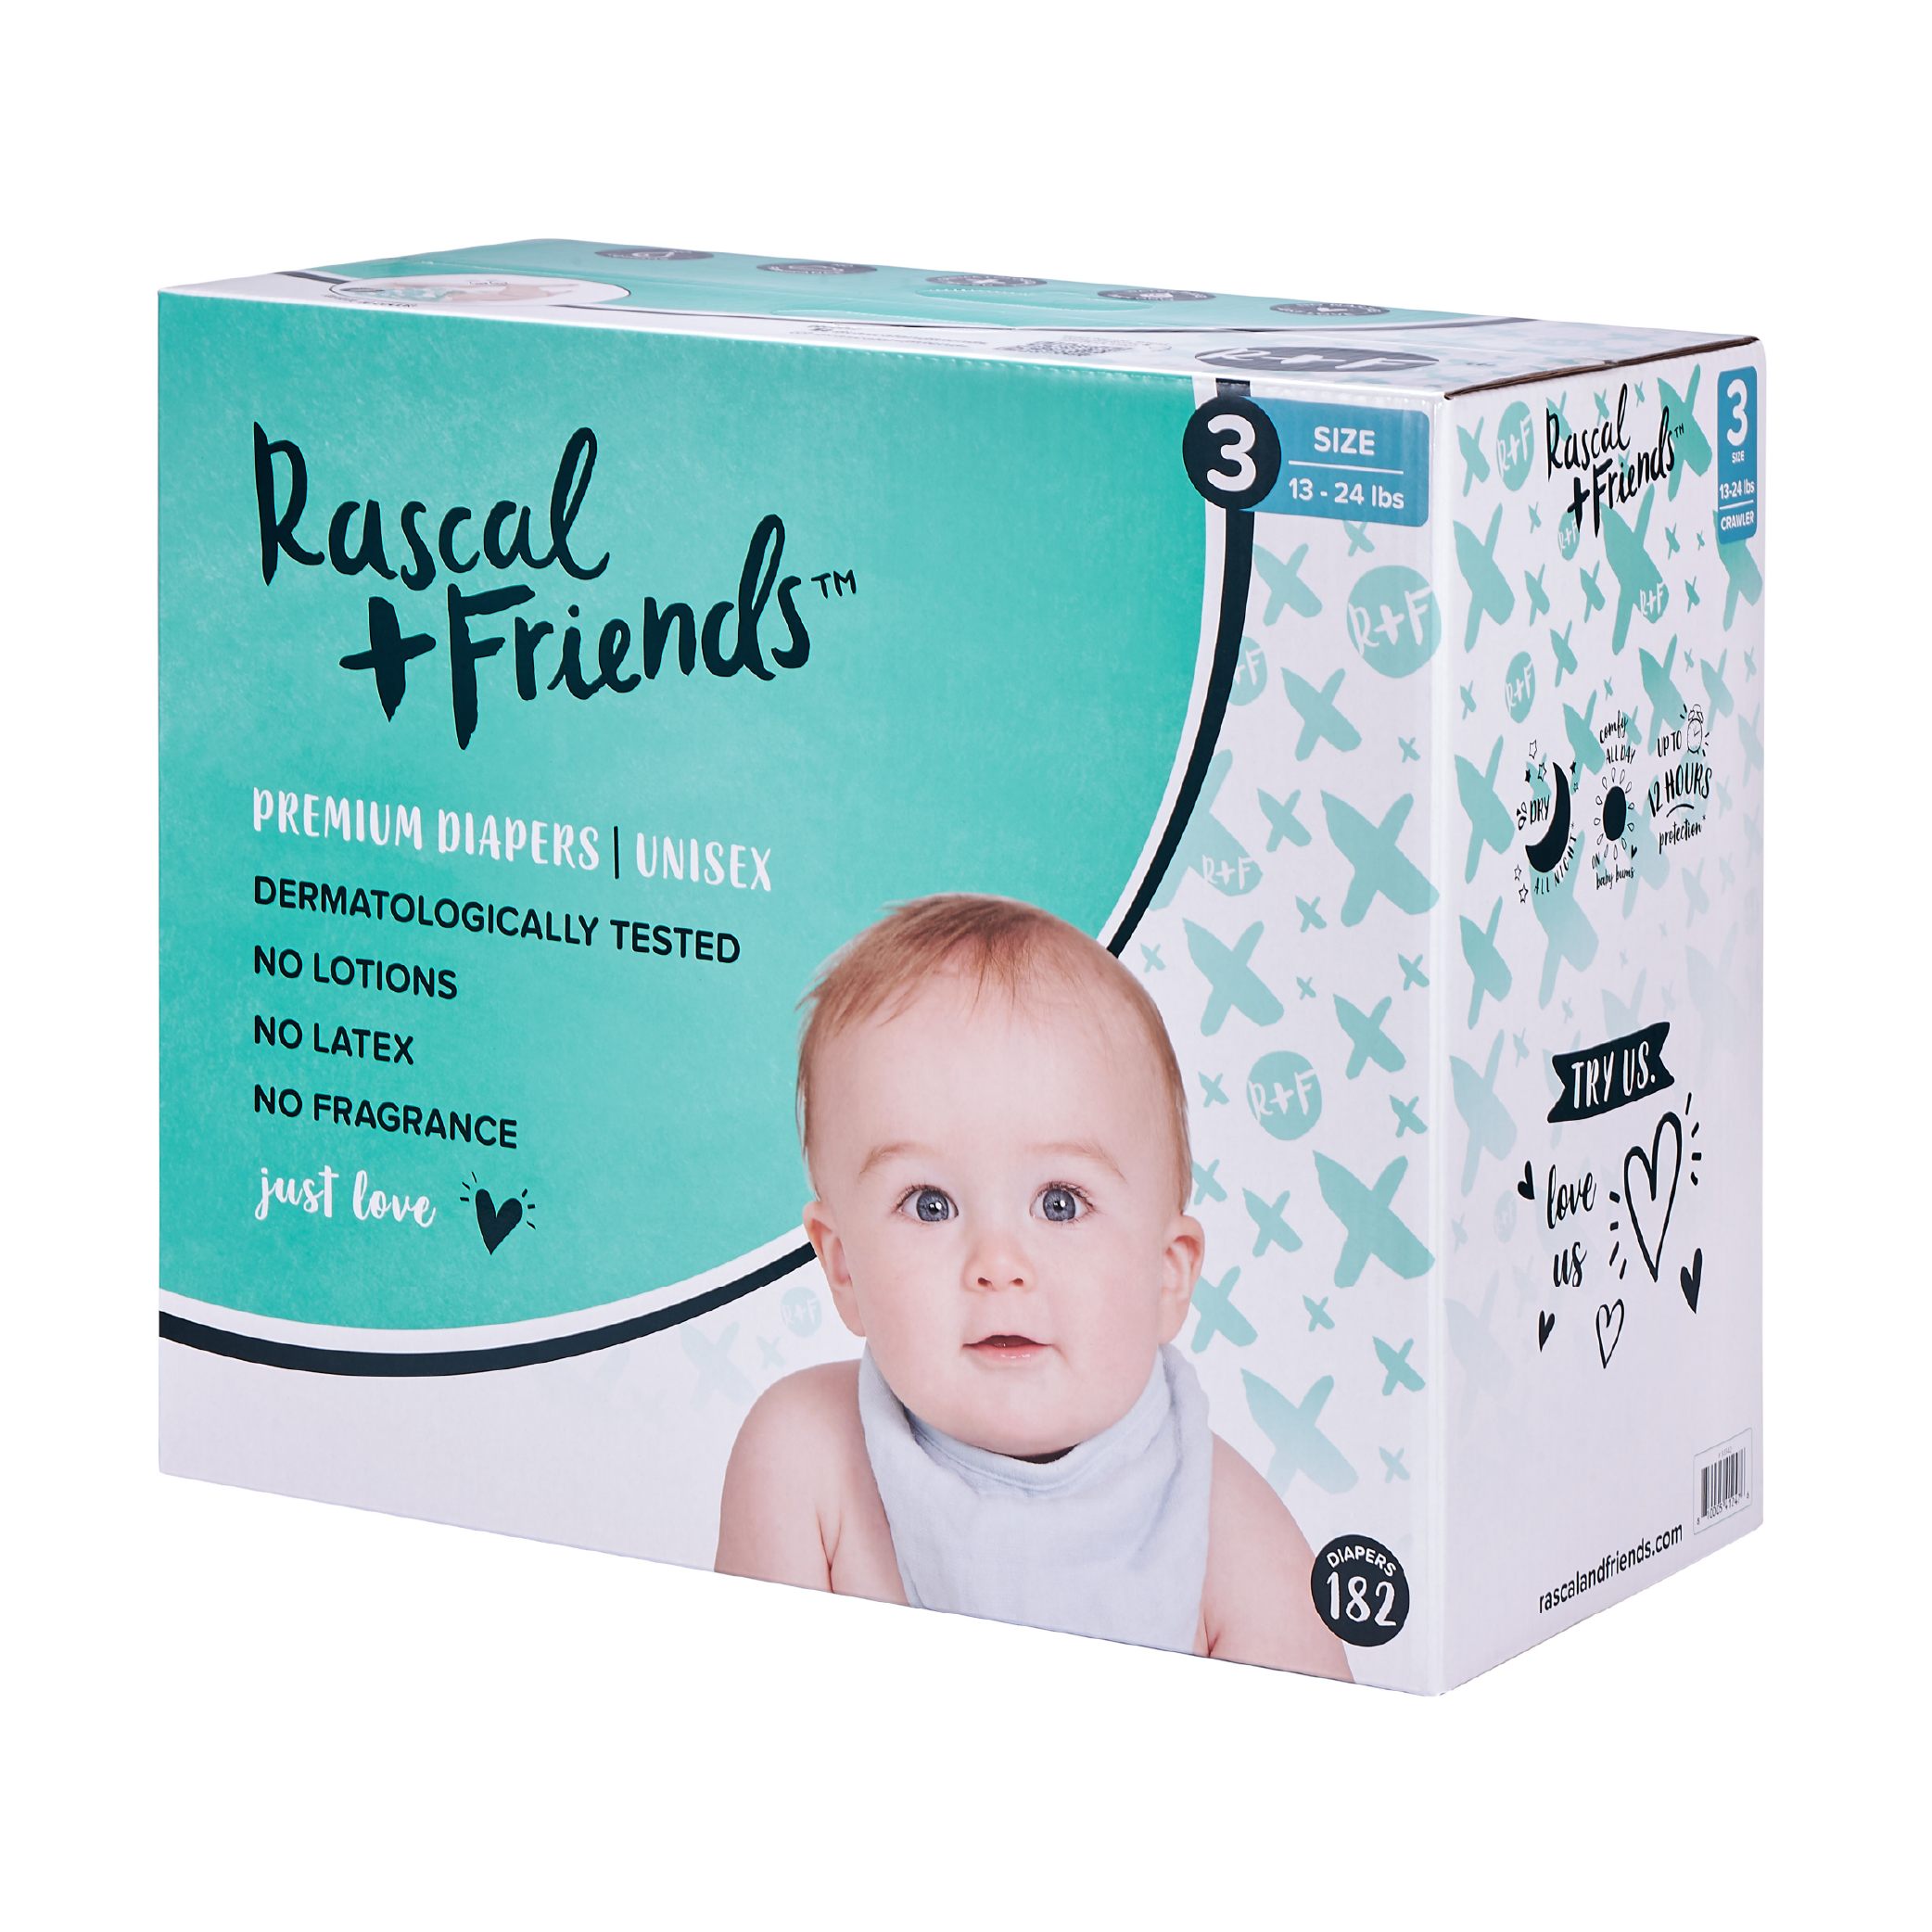 Rascal + Friends Premium Diapers Size 3, 182 Count (Select for More Options) - image 2 of 11